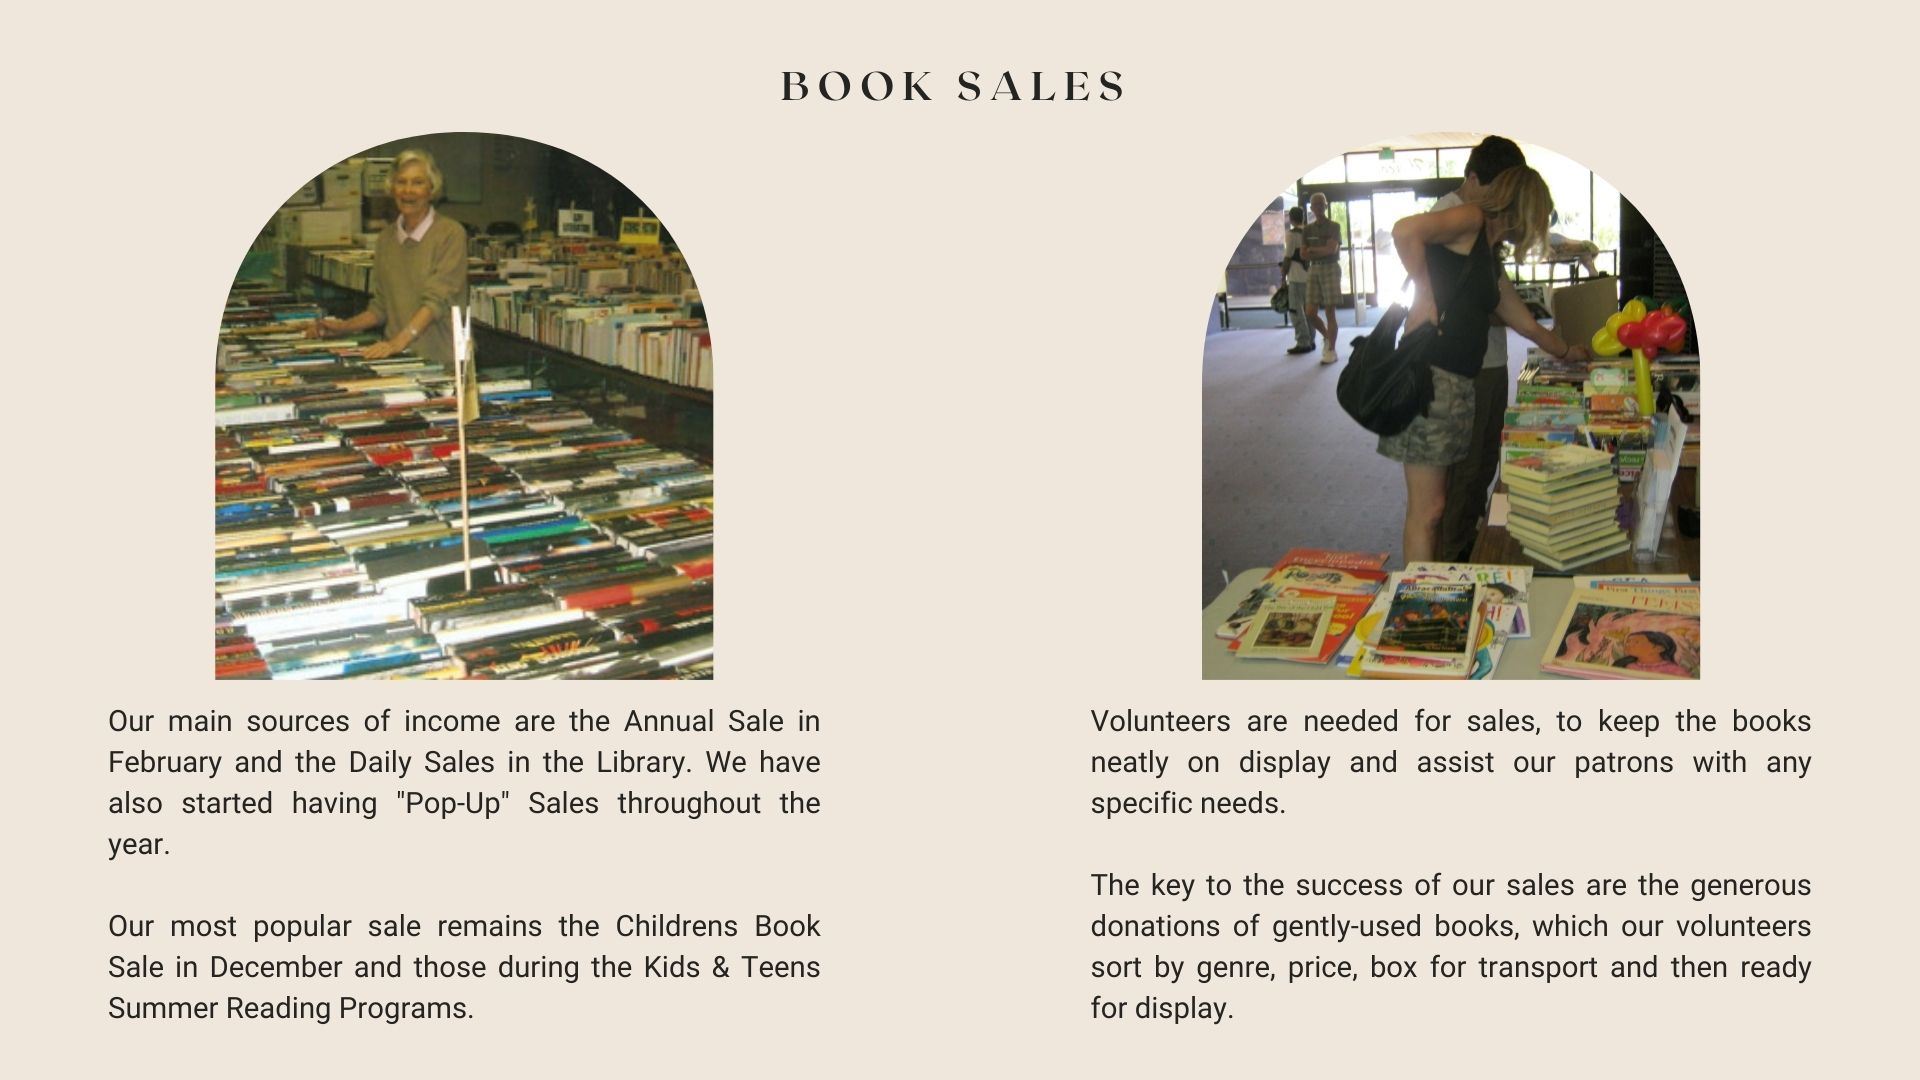 Book Sales.  Our main sources of income are the annual sale in February and the daily sales in the library. we have also started having pop up sales throughout the year. our most popular sale remains the childres book sale in December and those during the kids and teens summer reading programs. Volunteers are needed for sales to keep books neatly on display and assist our patrons with any needs. the key to the success of our sales are the generous donations of gently used books which our volunteers sort by genre price box for transport and then ready for display.